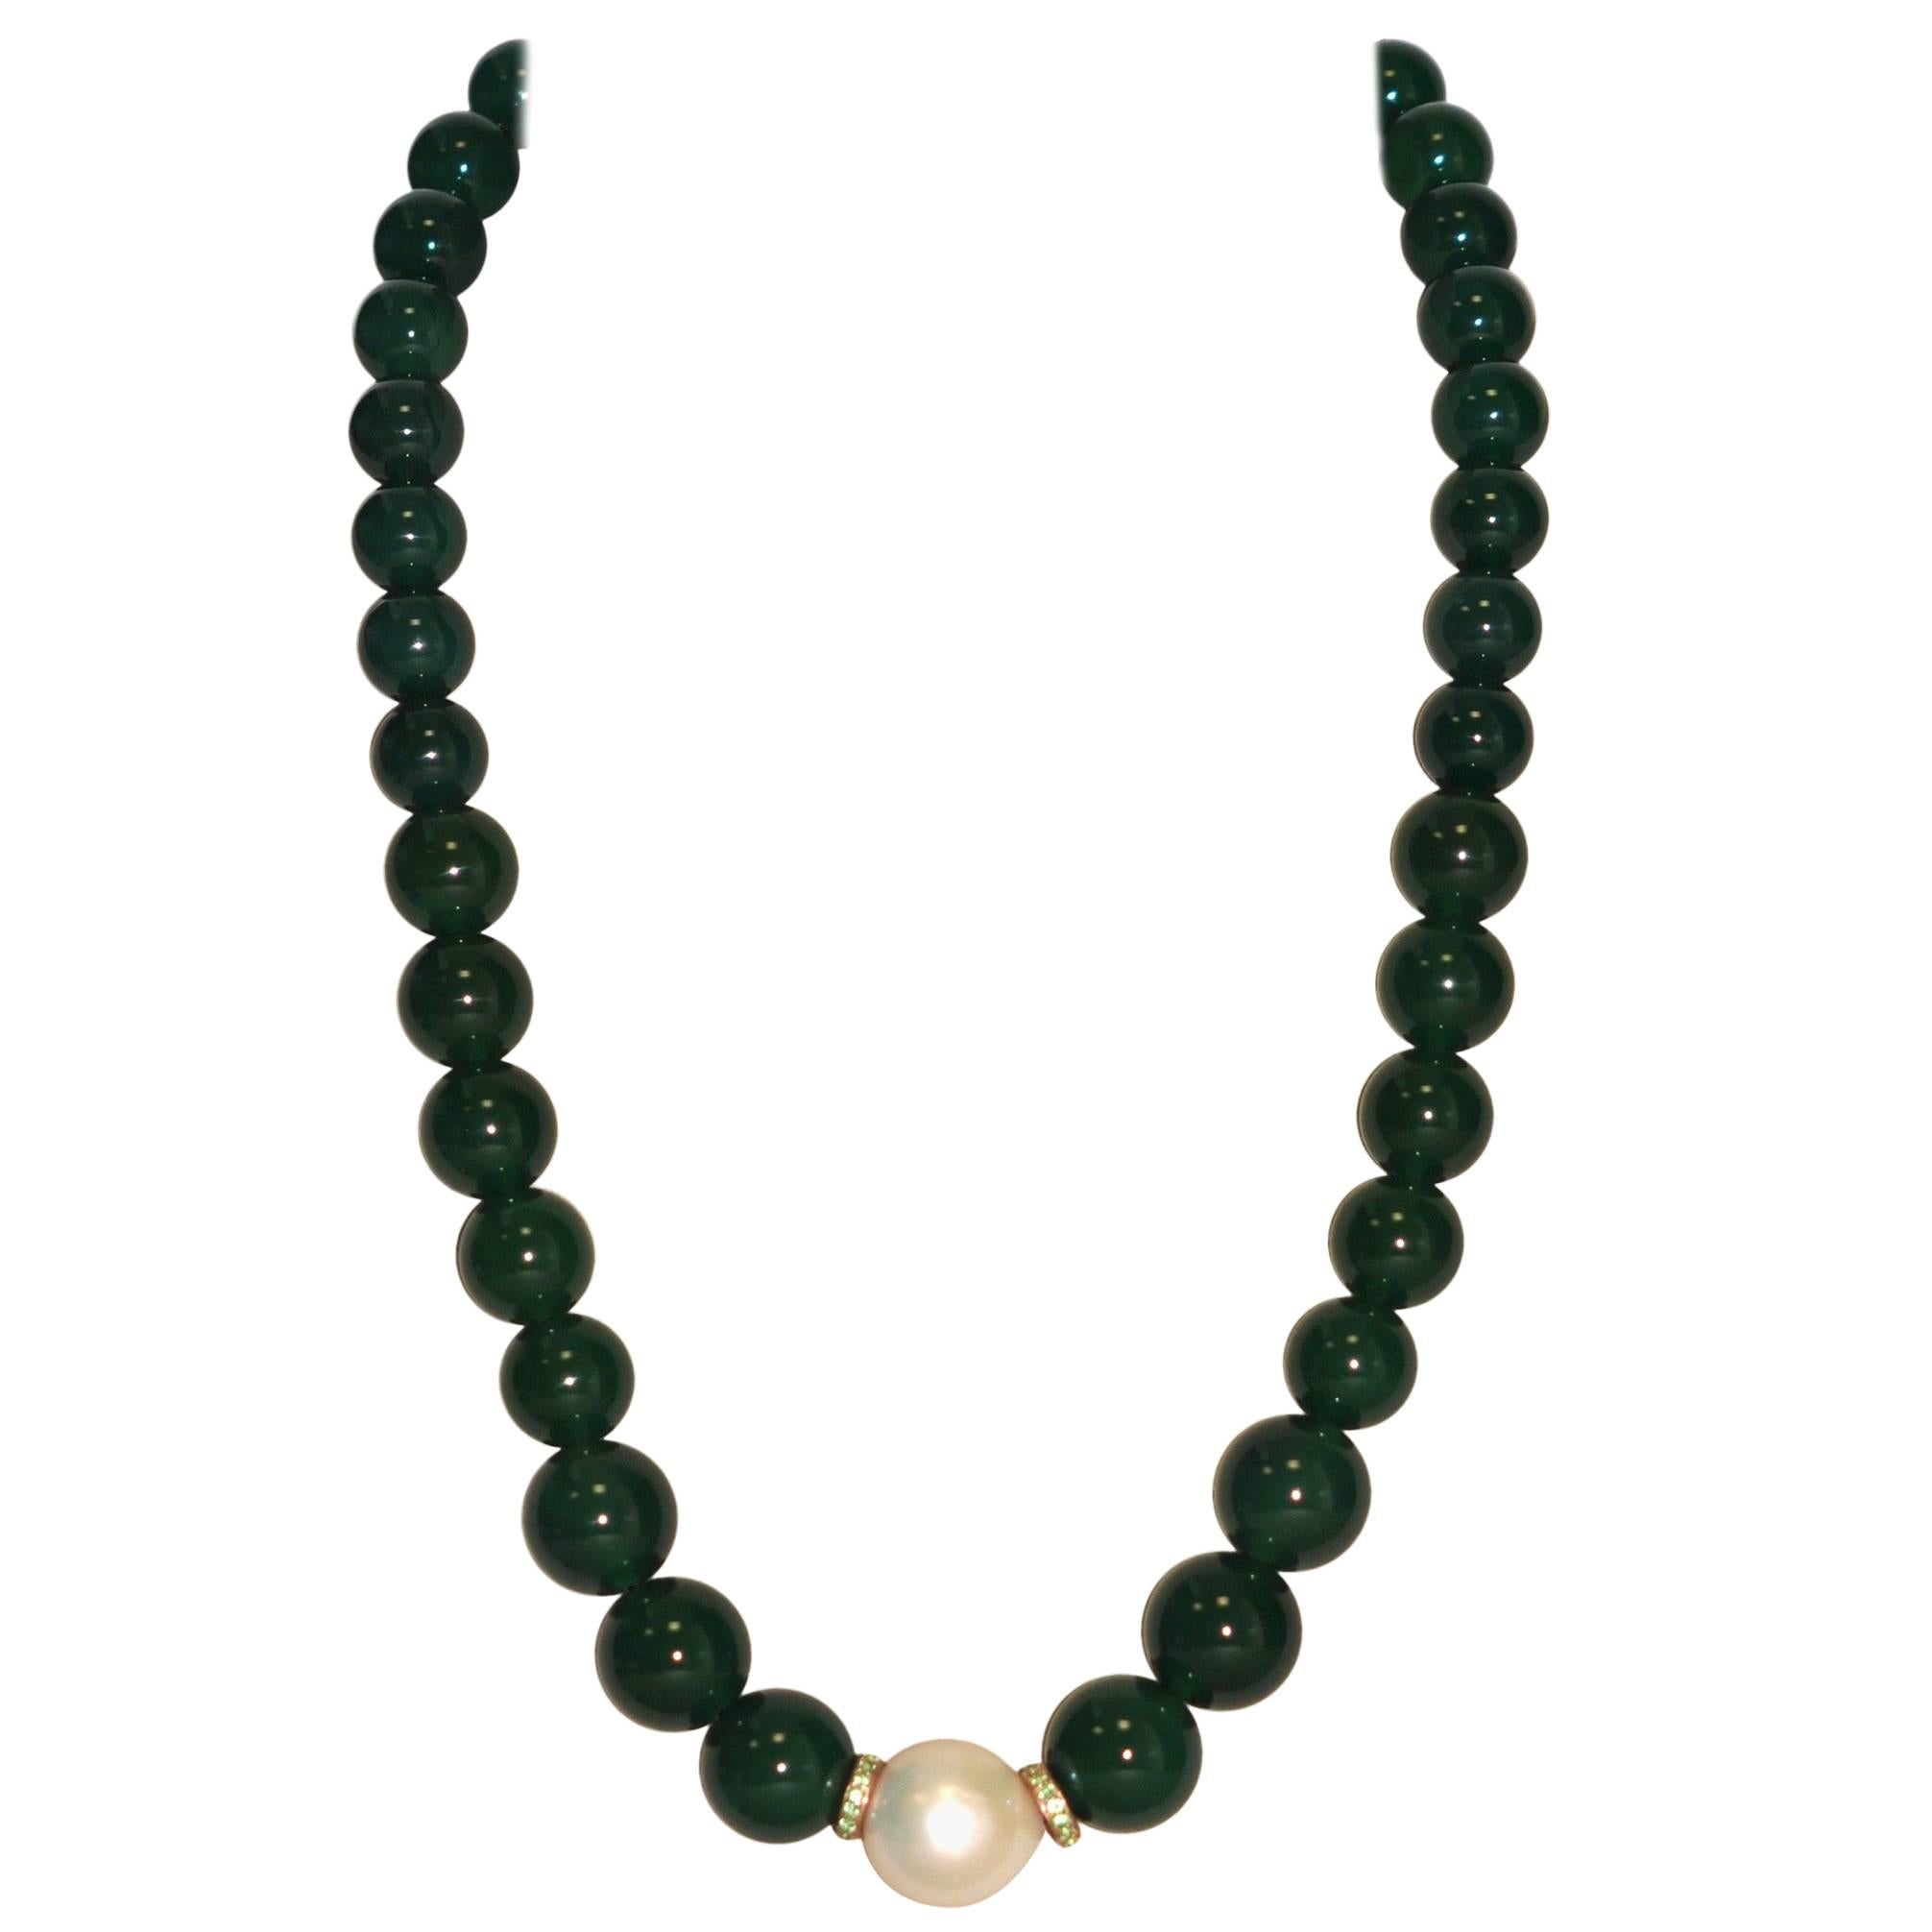 Discover this Green Agates, Tsavorites and Freshwater Pearl on Rose Gold Beaded Necklace.
Green Agates
Tsavorites
Freshwater Pearl
Rose Gold 18 Carat
